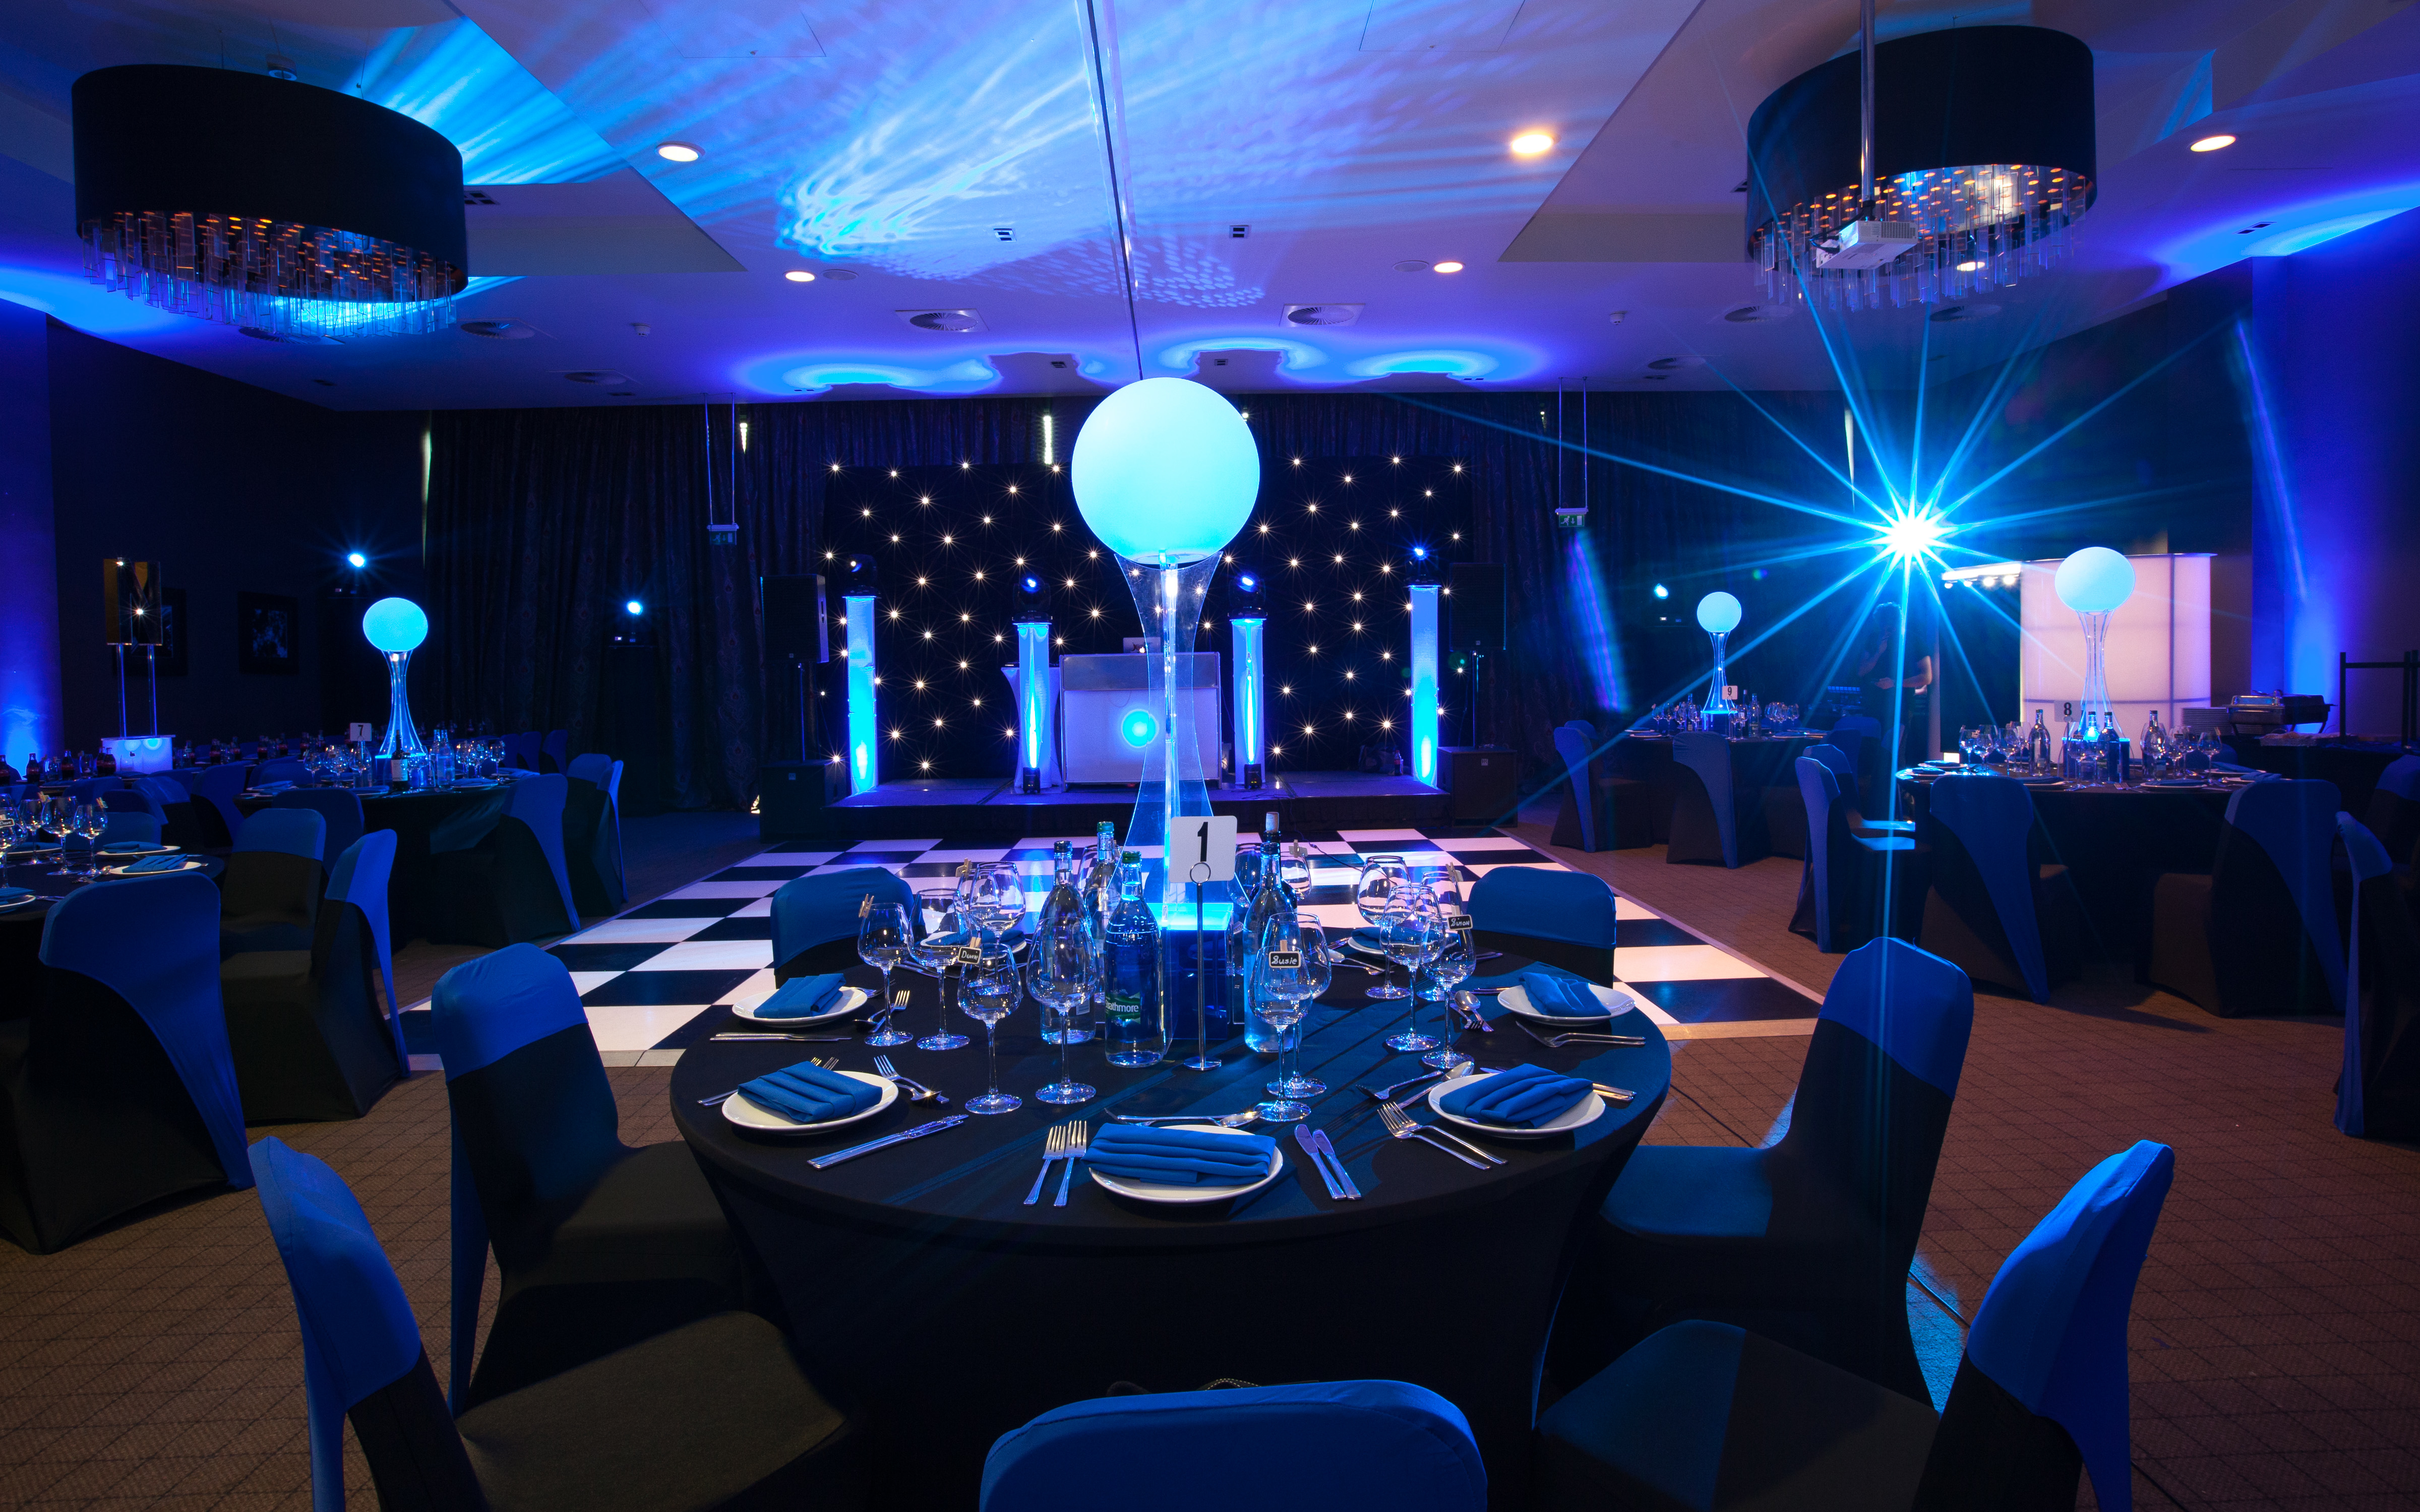 LED sphere table centres